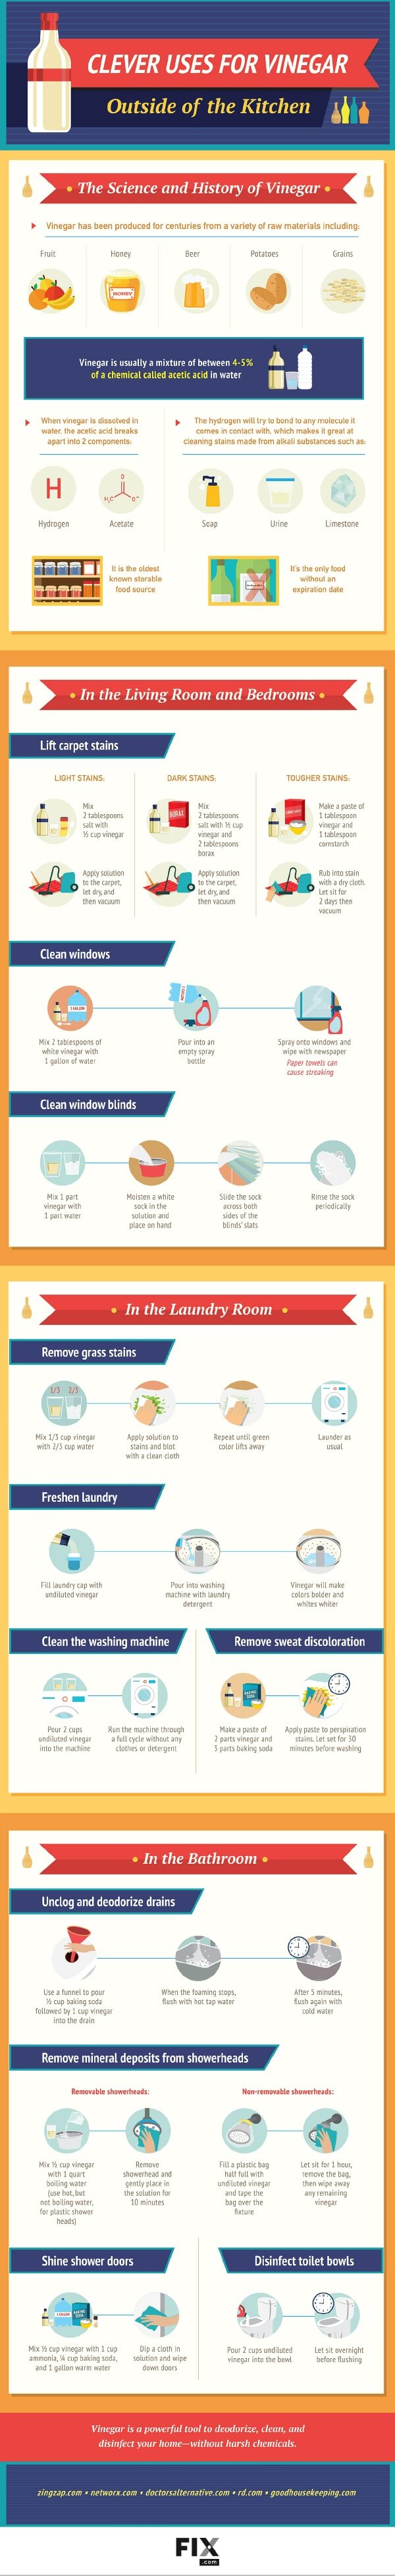 Clever Ways To Clean With Vinegar